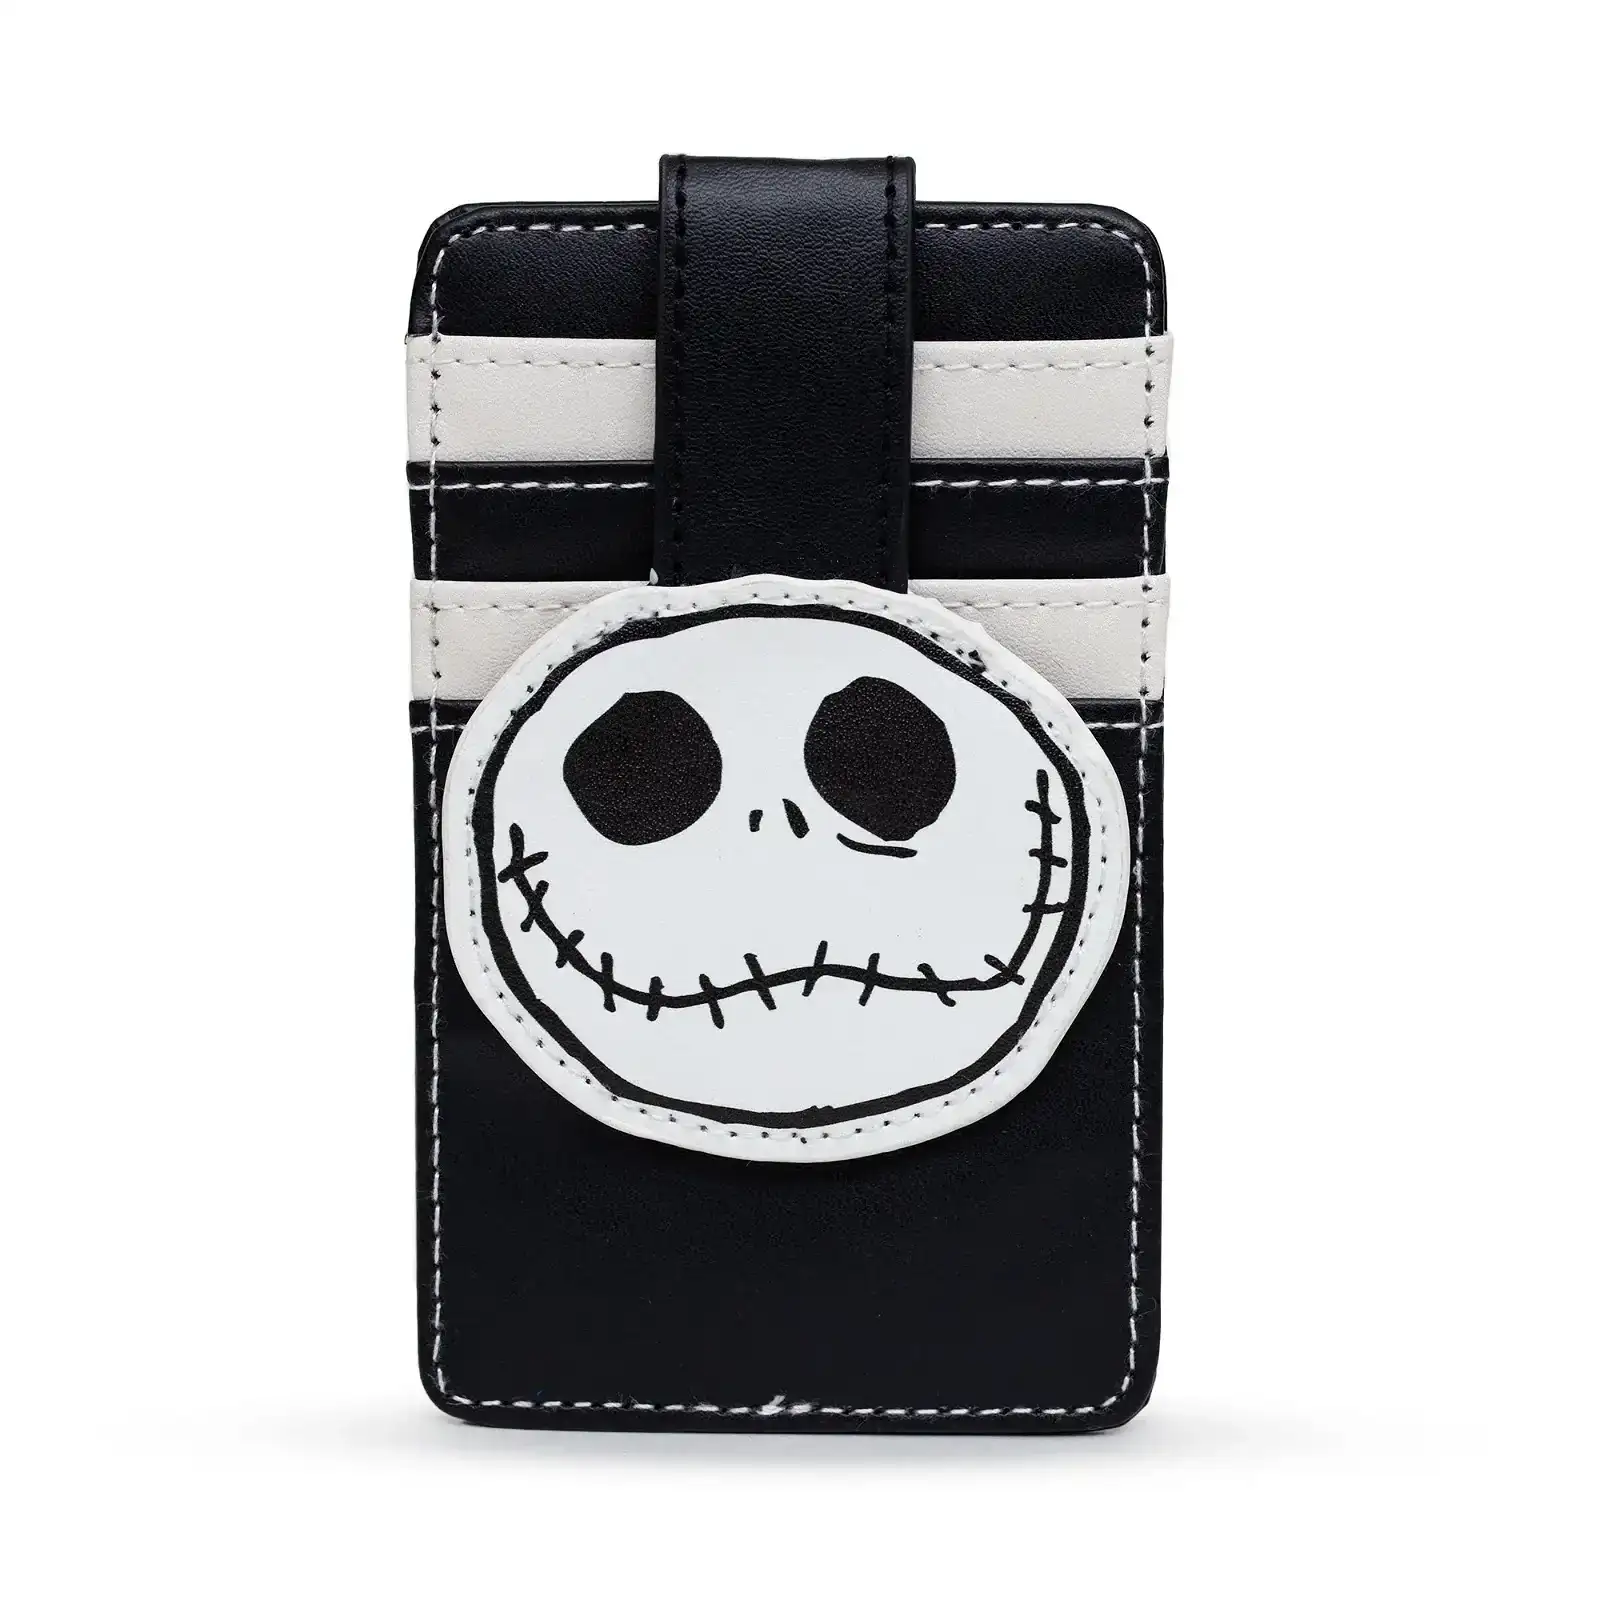 Image of Disney Wallet, Character Wallet ID Card Holder, The Nightmare Before Christmas Jack Smiling Expression Black, Vegan Leather